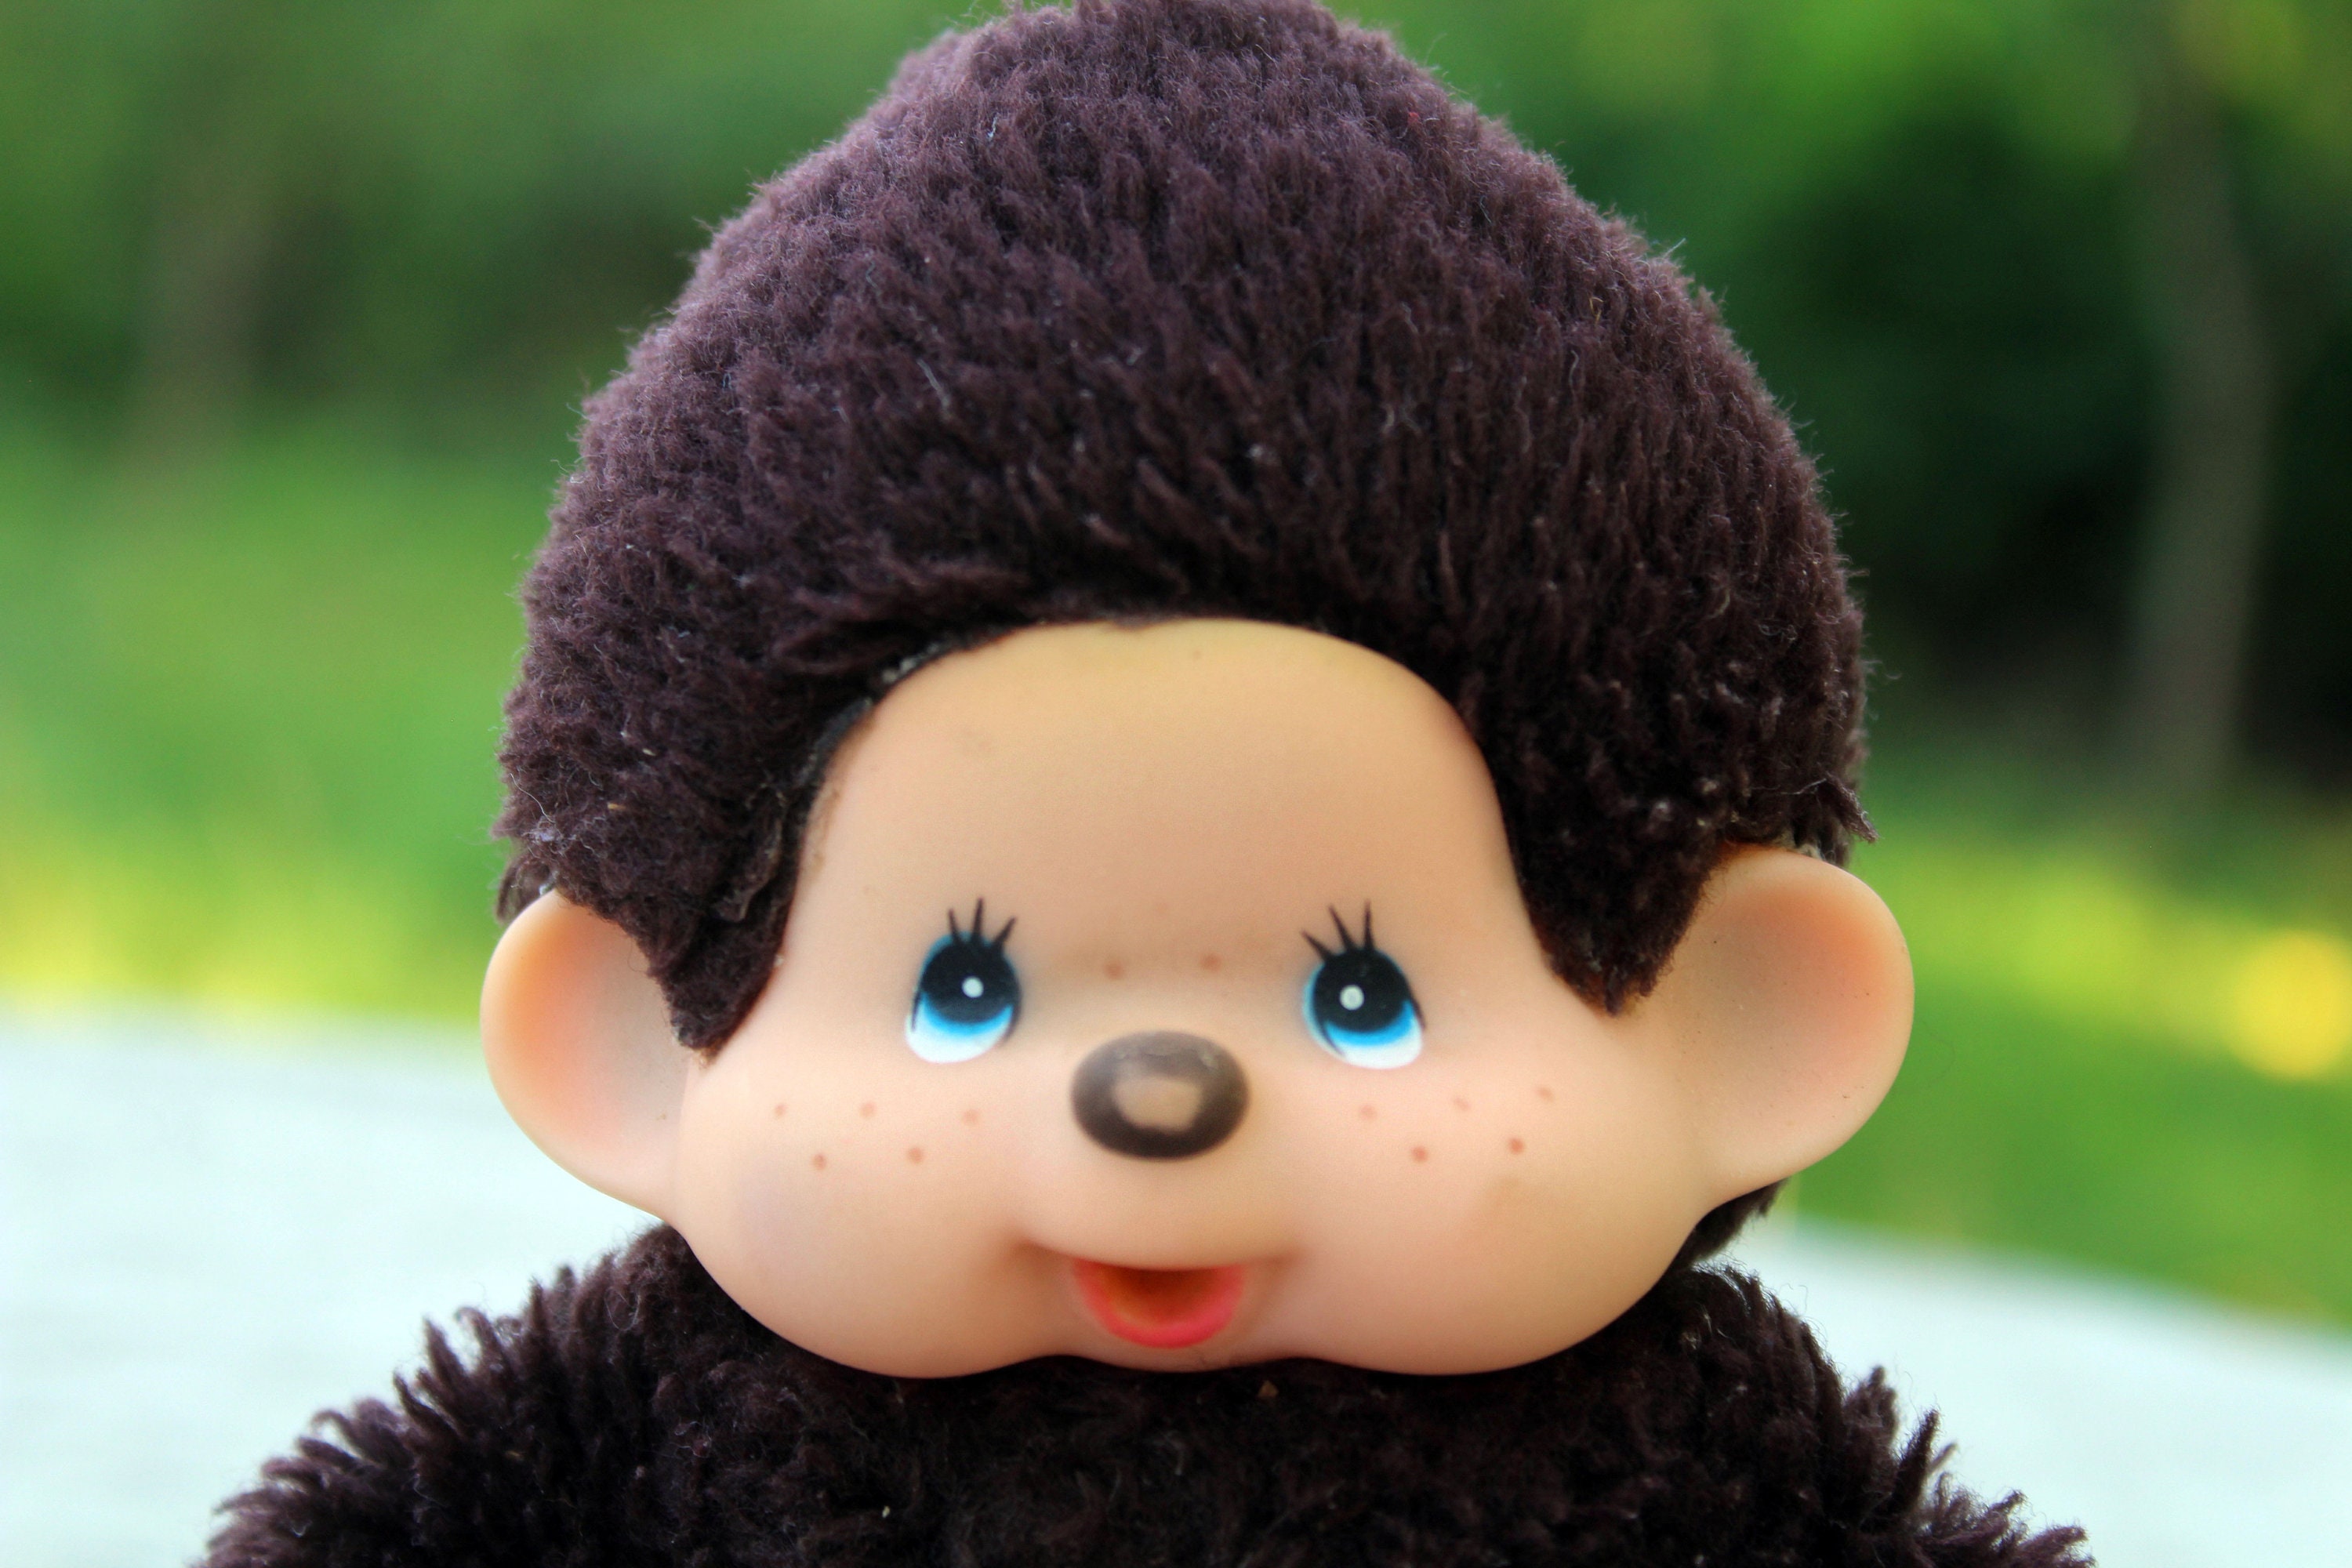 Vintage Monchhichi Sekiguchi 7 Tall Toy 70-80s Monkey Doll Girl  Collectables -  Norway